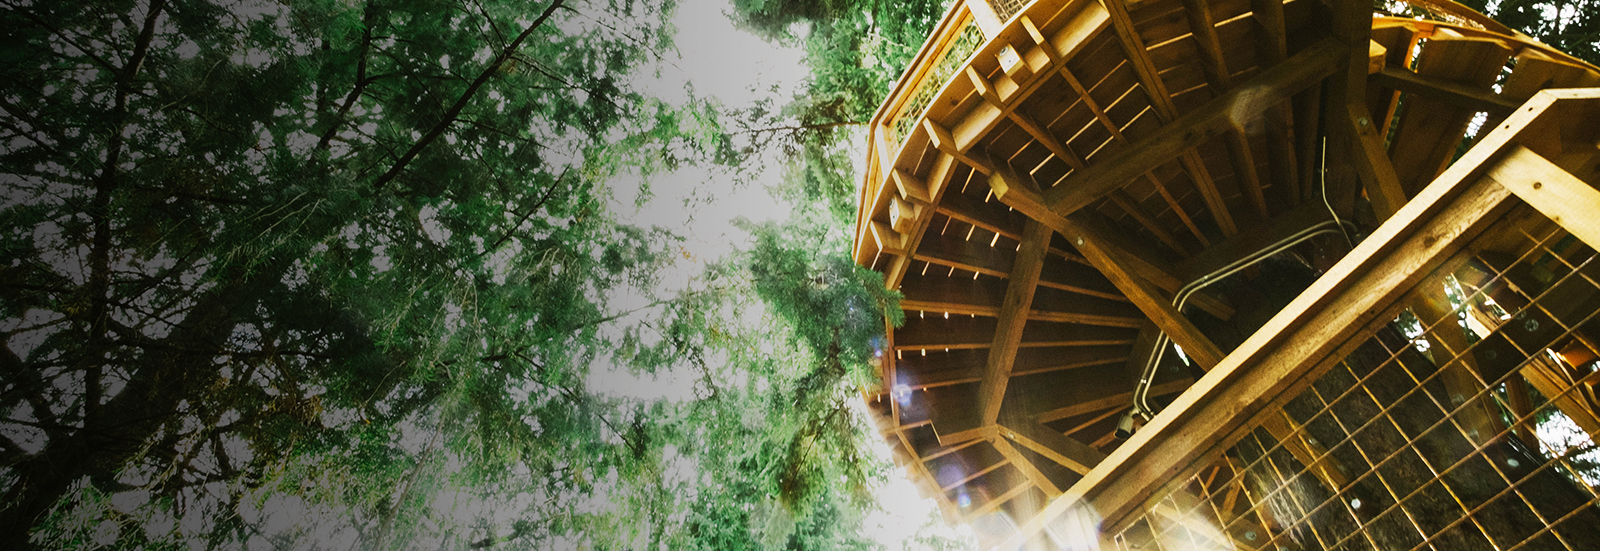 Winding wooden staircase against a backdrop of trees and sunlight